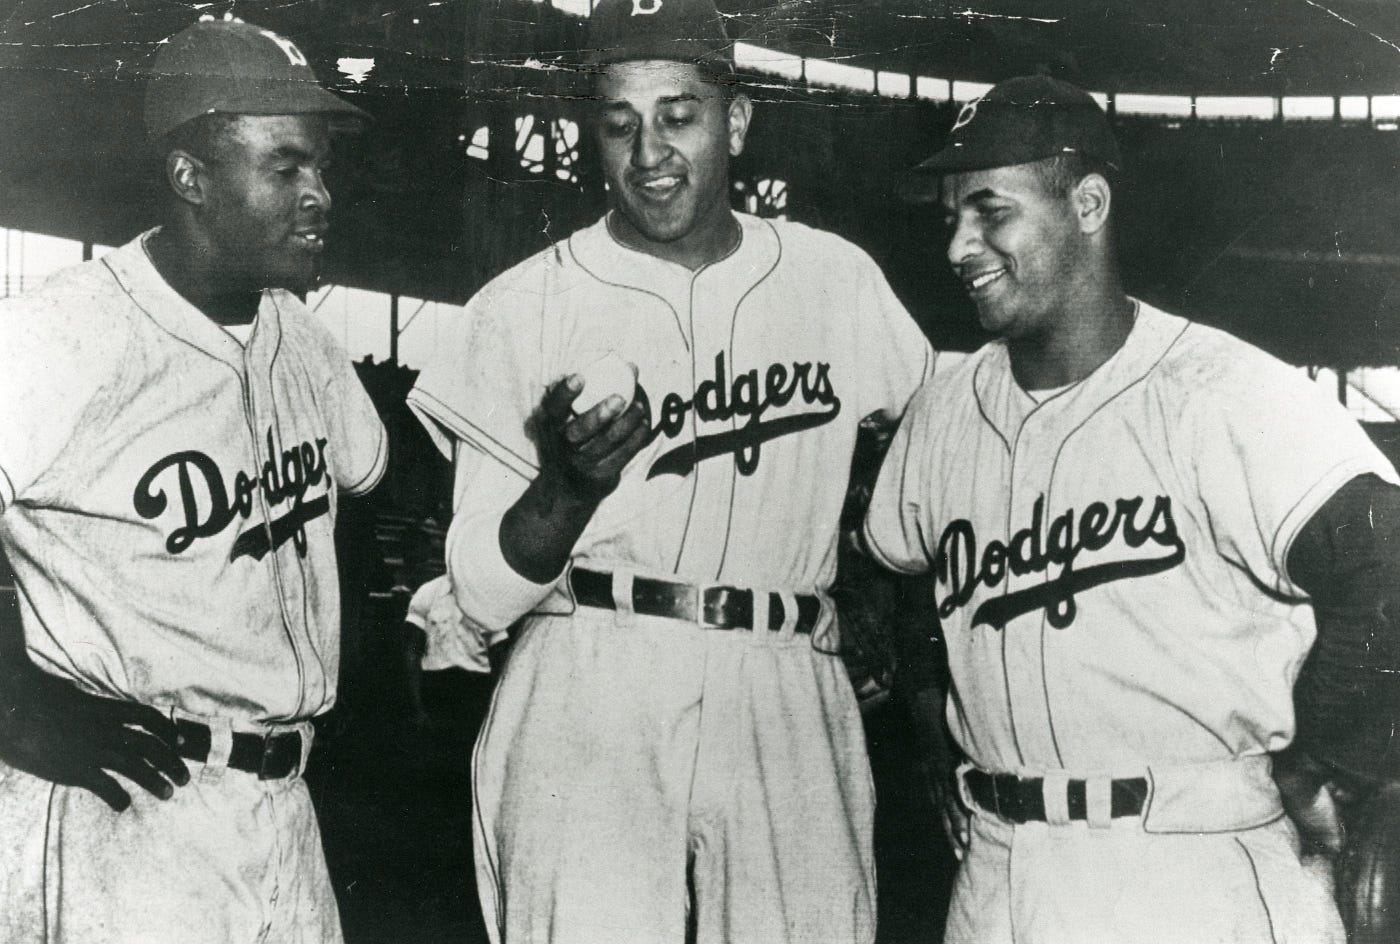 OTD: Newcombe's debut. Don Newcombe made his MLB debut on May